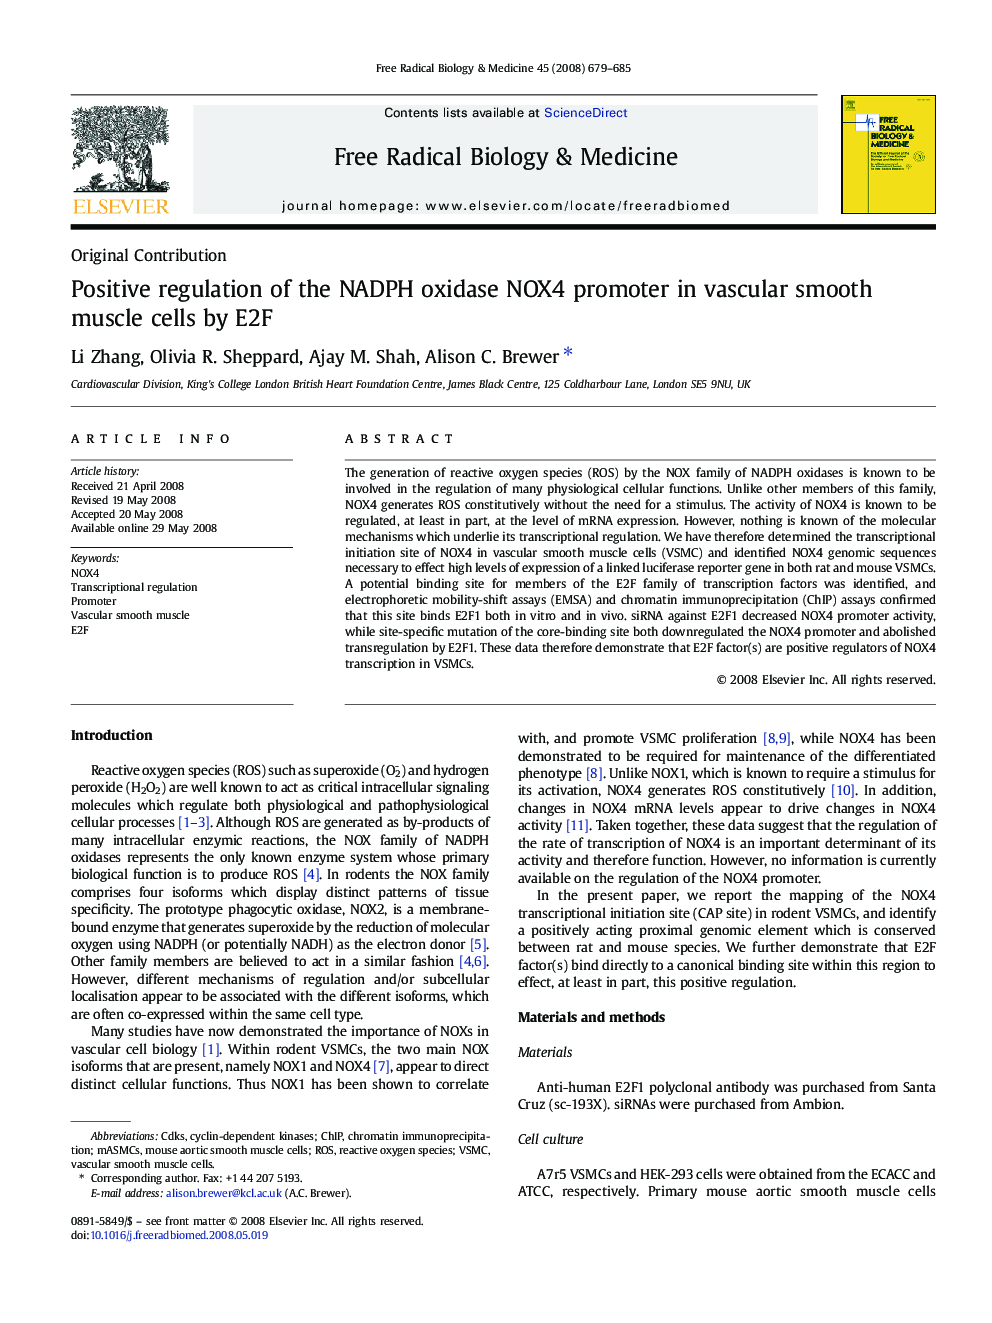 Positive regulation of the NADPH oxidase NOX4 promoter in vascular smooth muscle cells by E2F